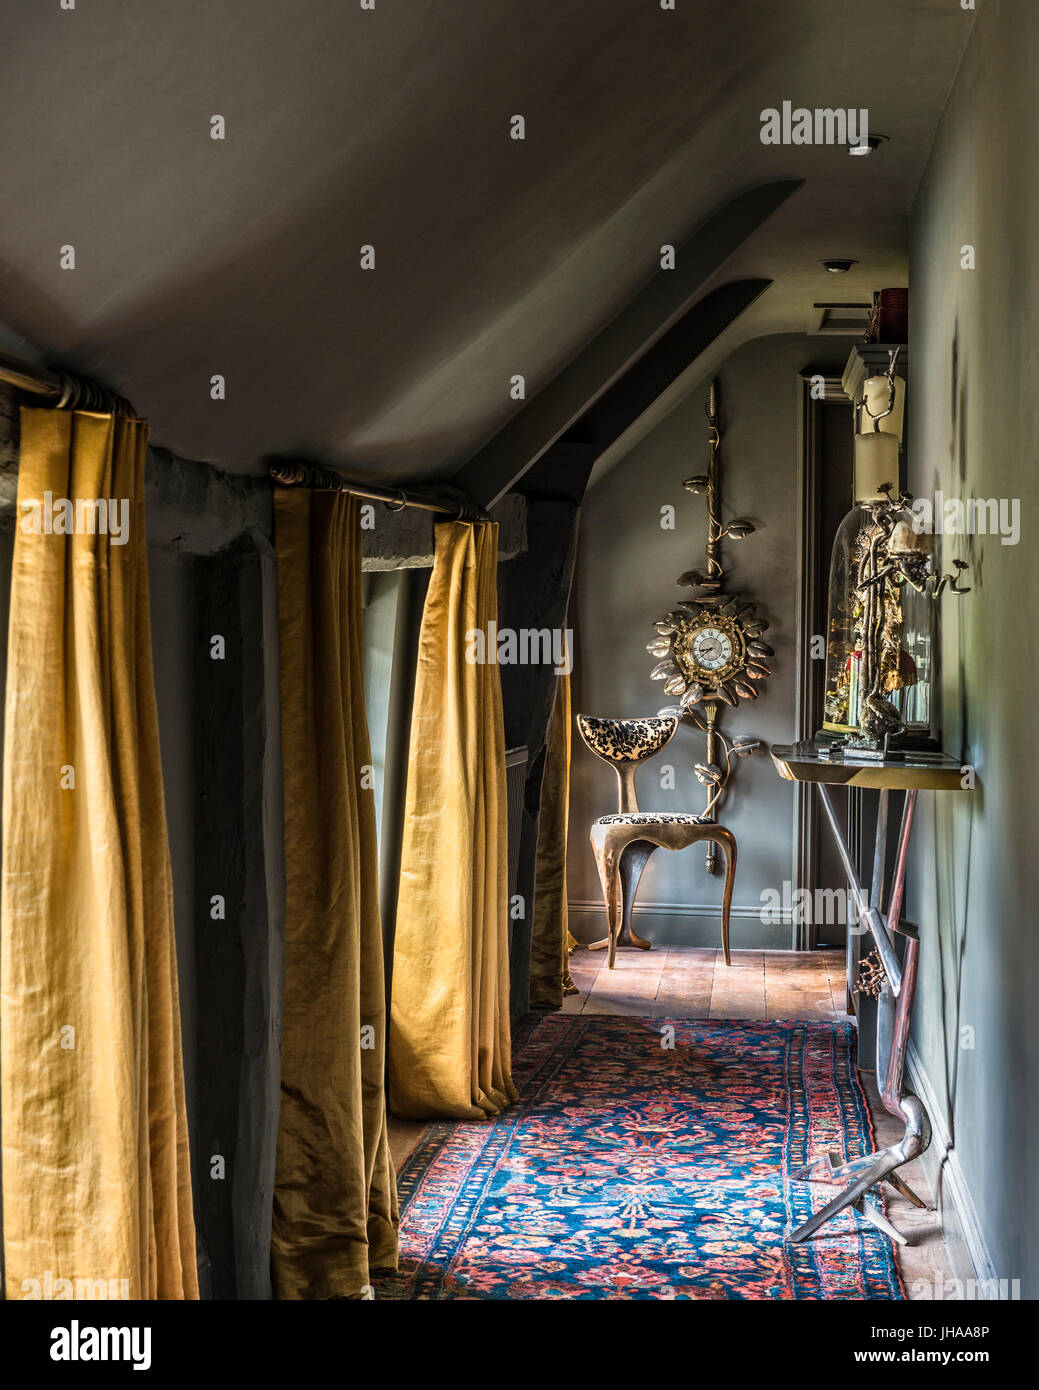 Hallway with yellow curtains and patterned rug Stock Photo